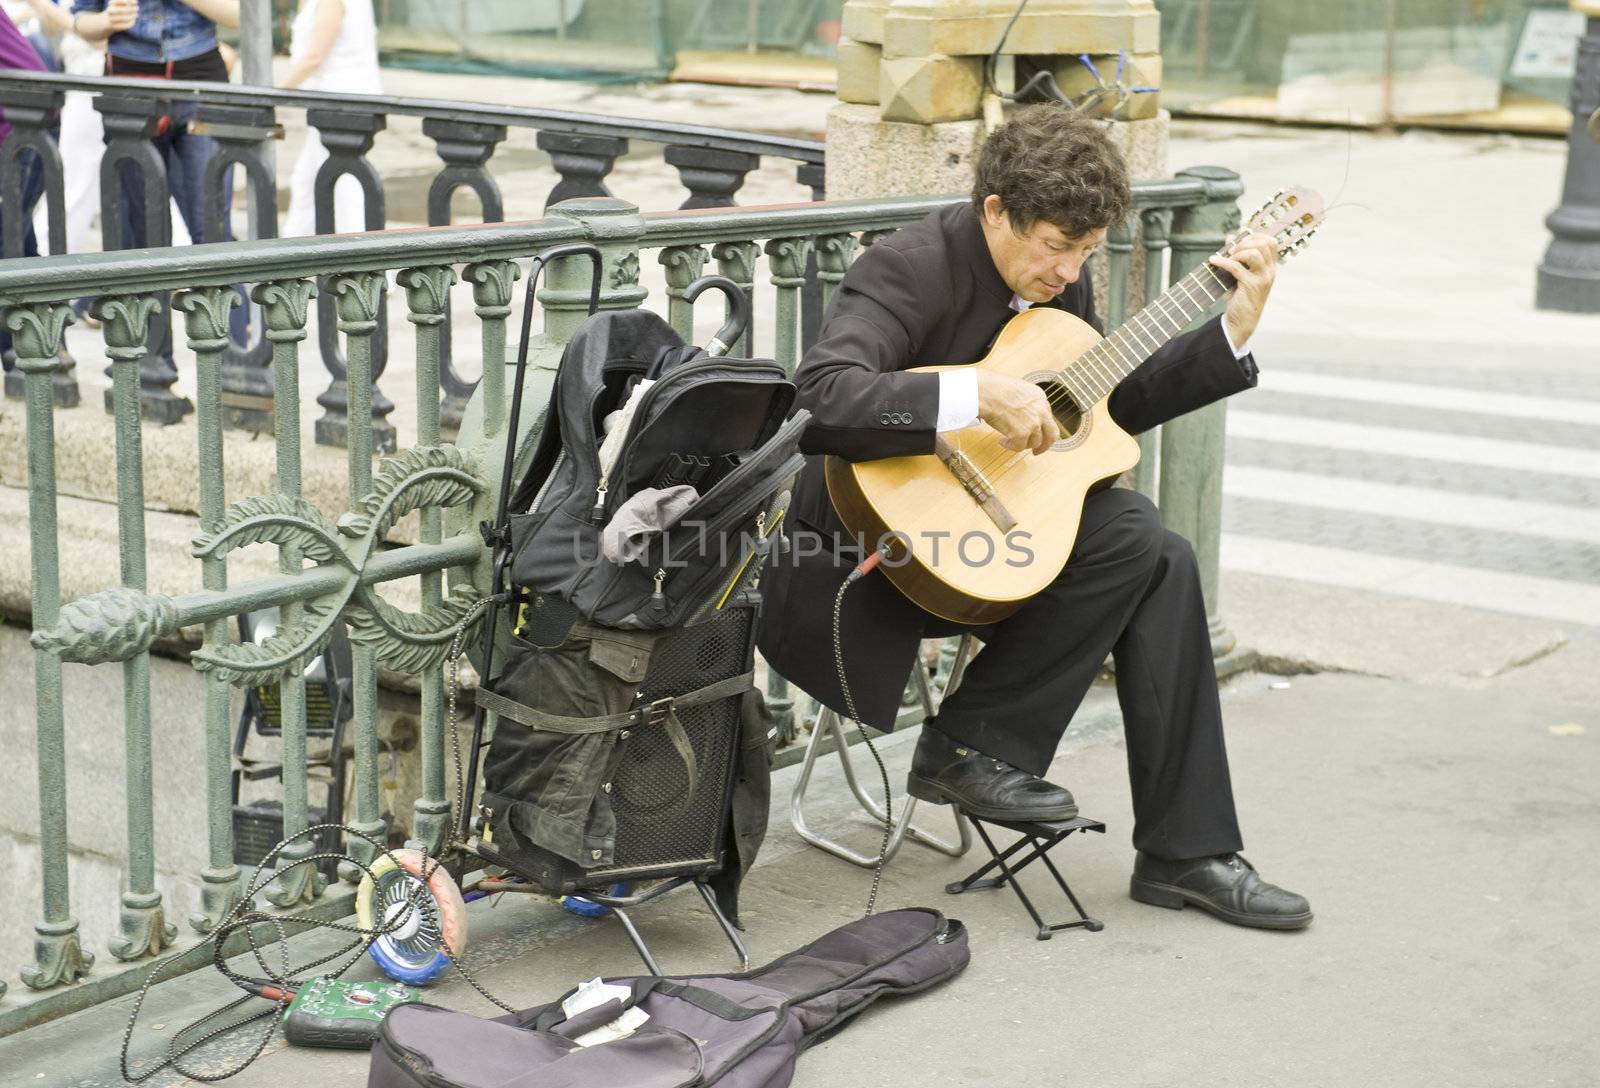 The street musician in the St Petersburg, Russia